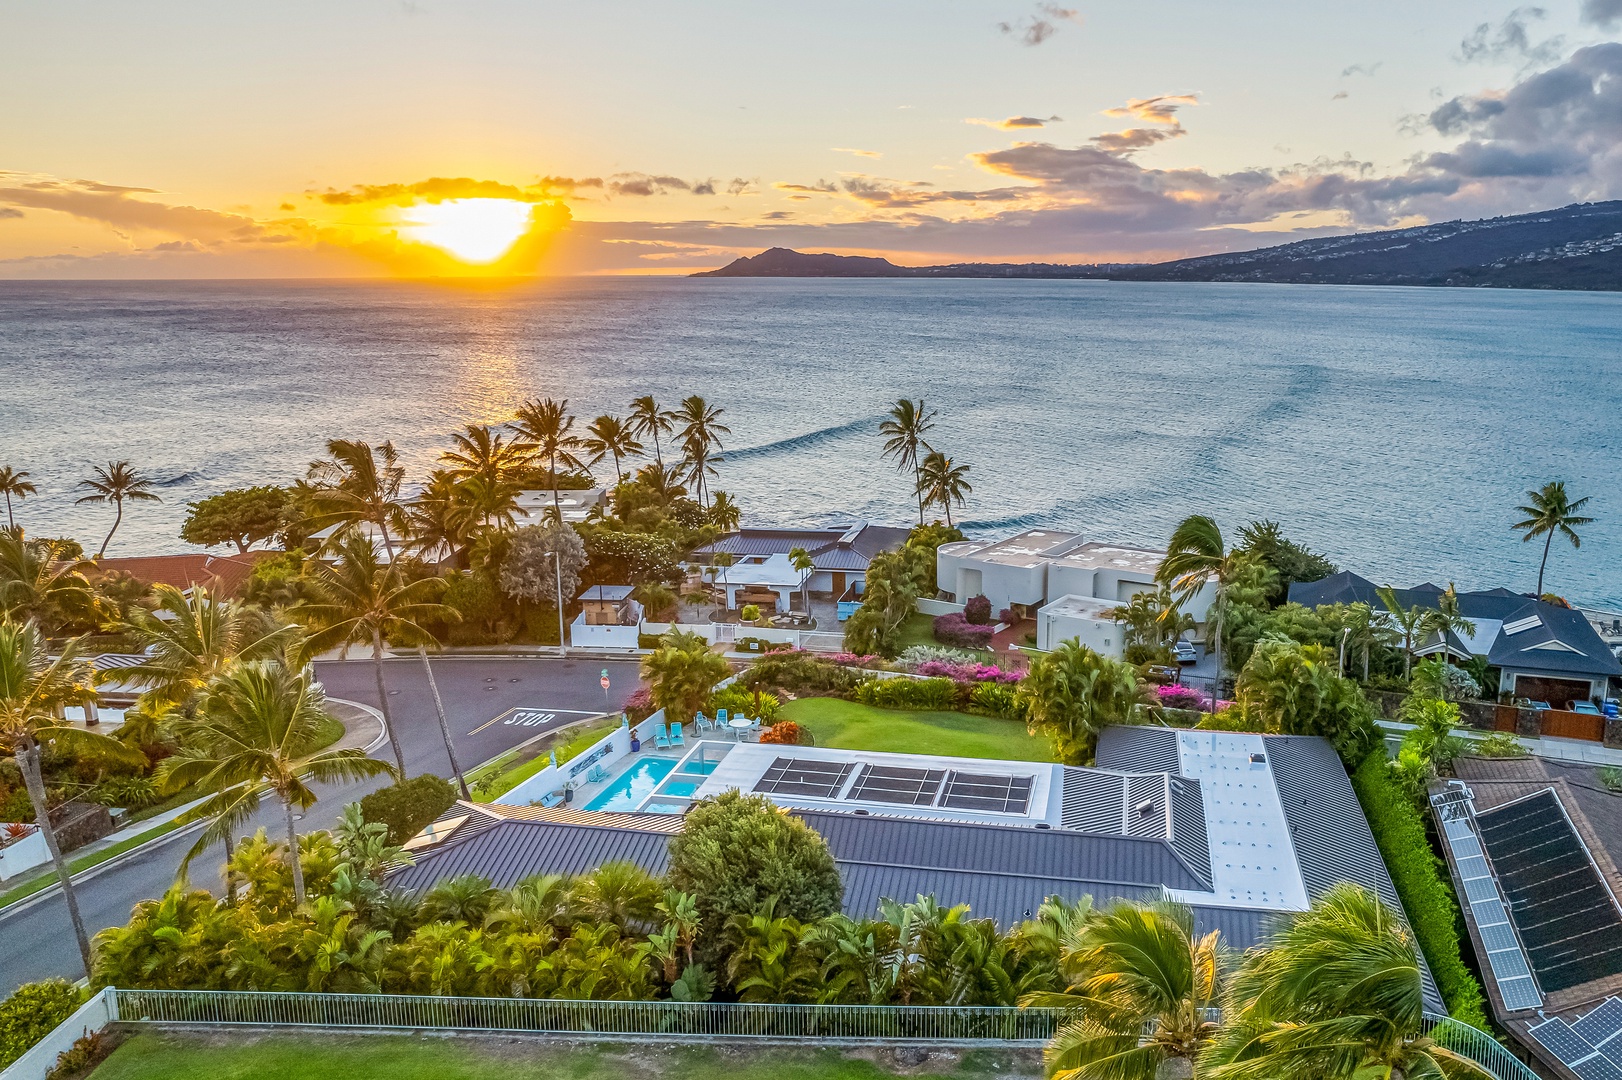 Honolulu Vacation Rentals, Hale Ola - The Villa offers awe-inspiring ocean views, Diamond Head, and majestic mountains from every perspective